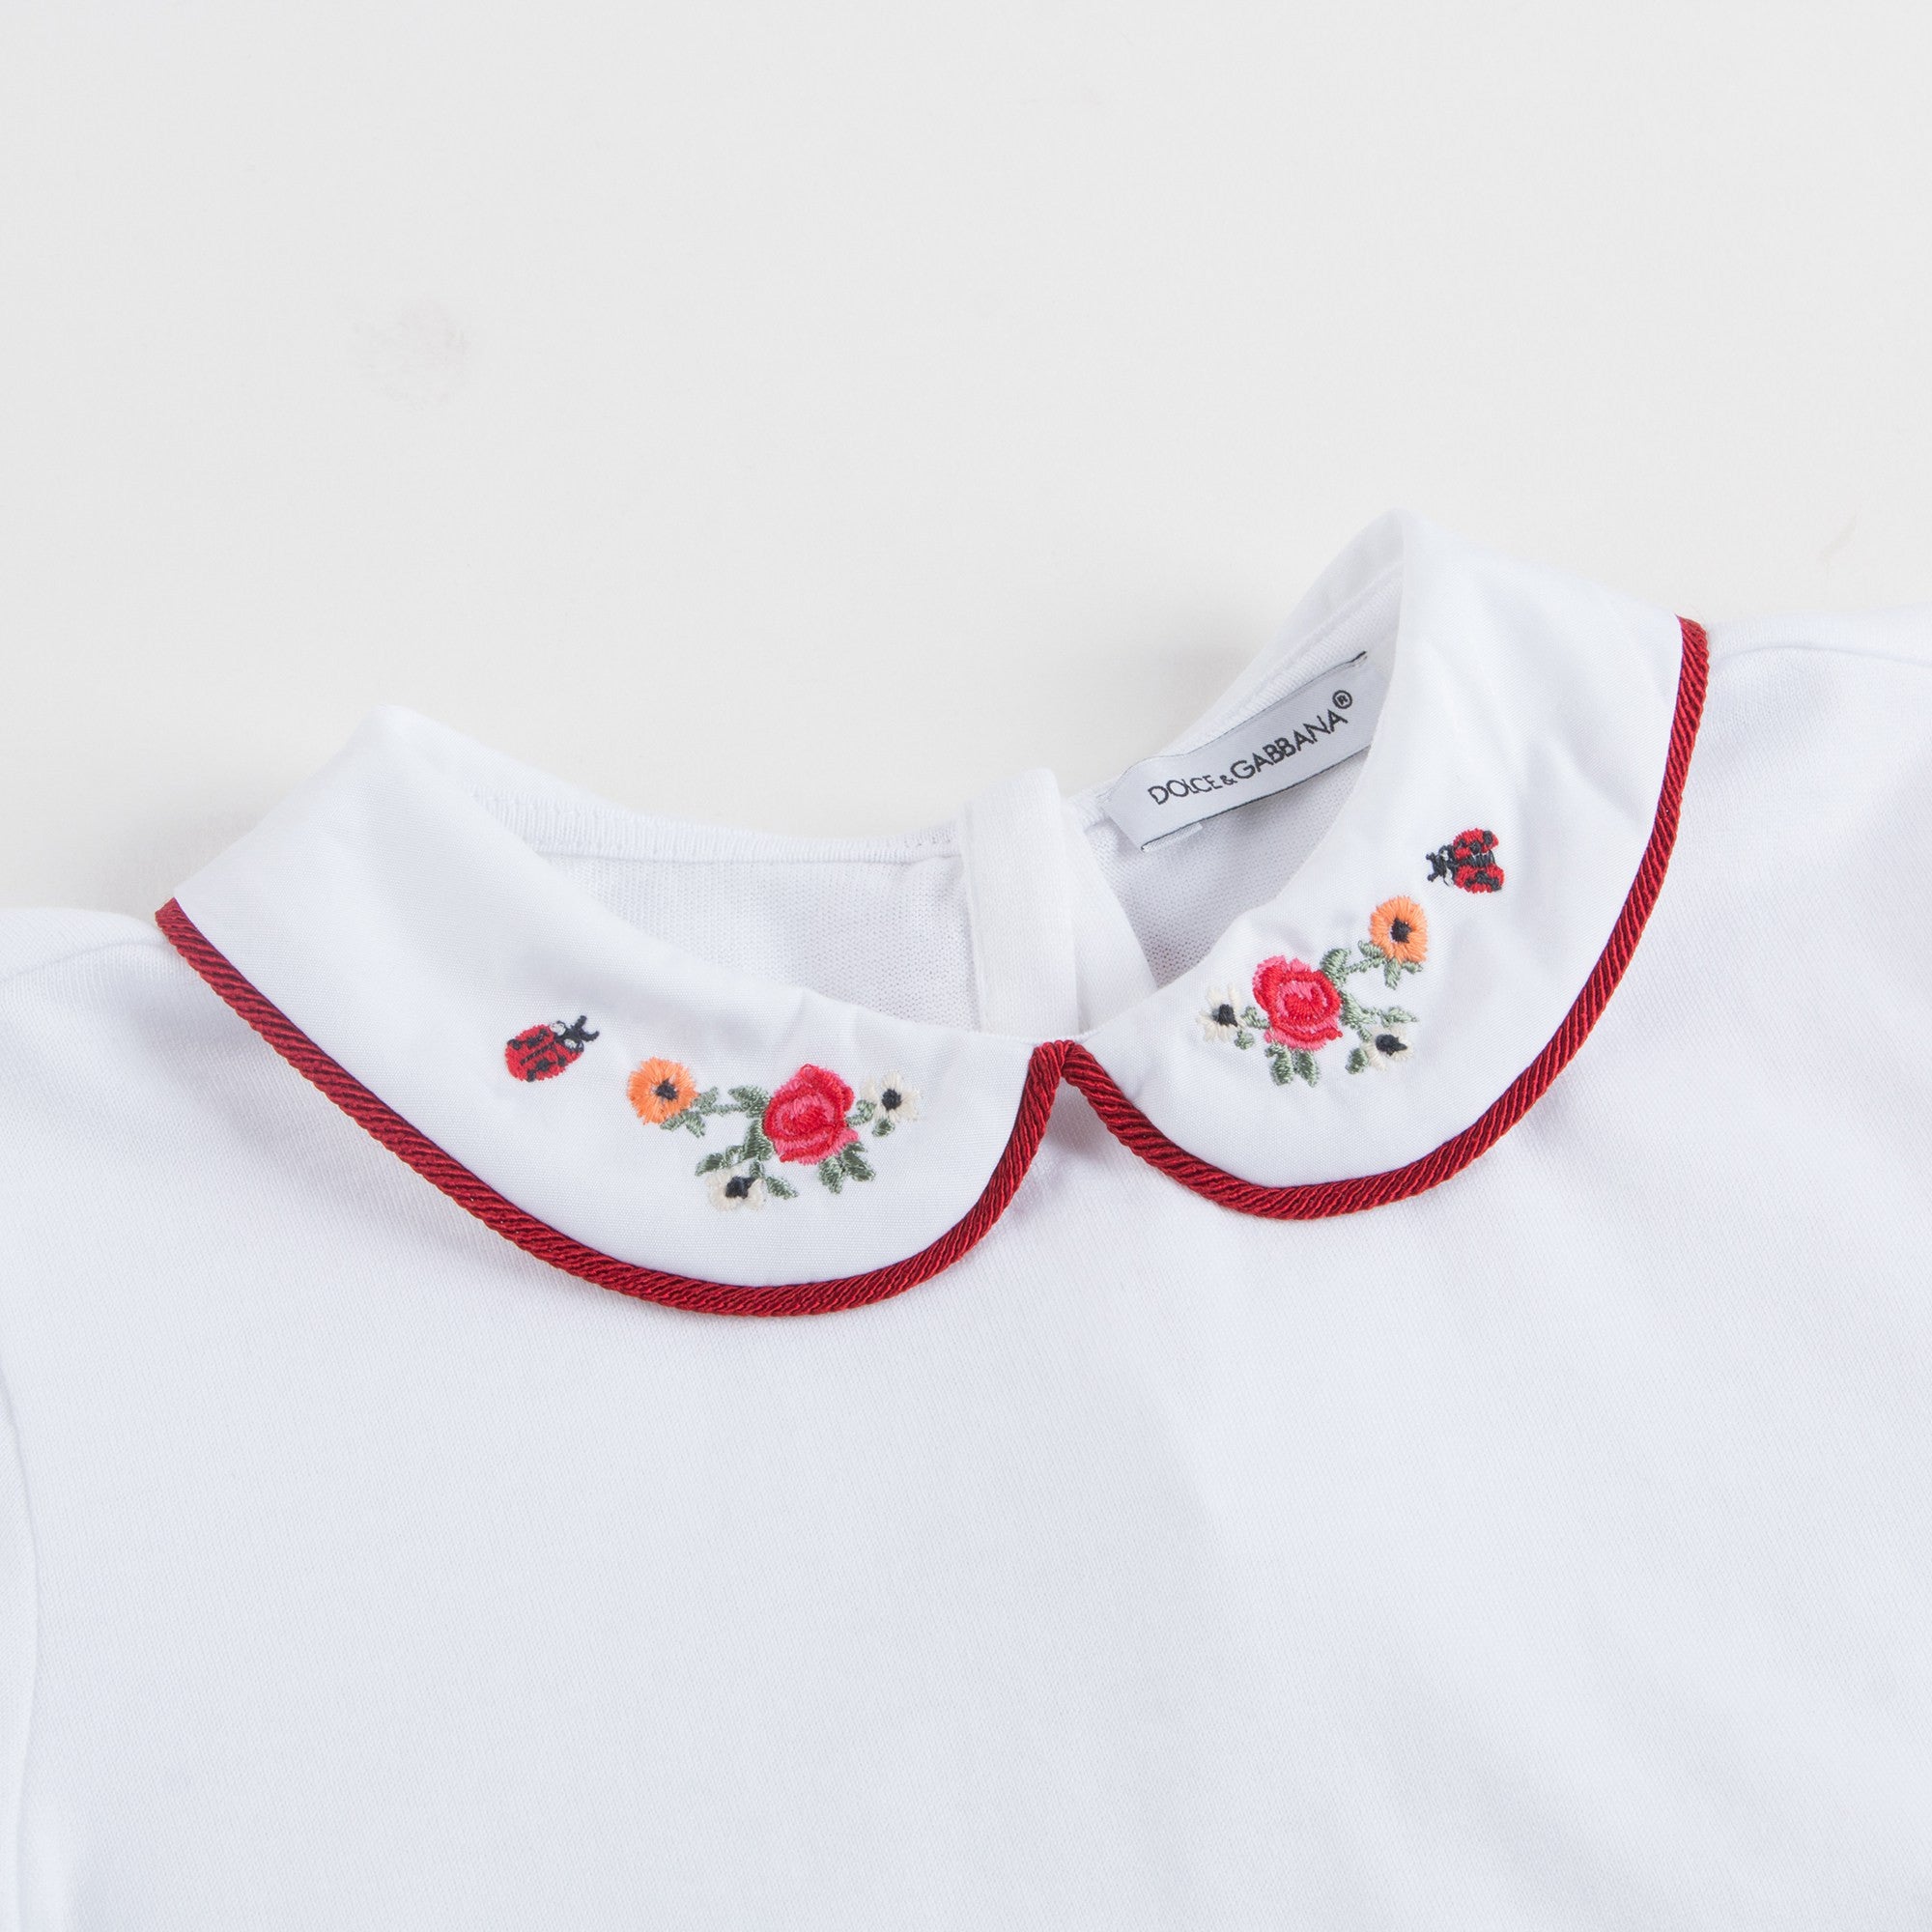 Girls White Cotton Blouse With Collar